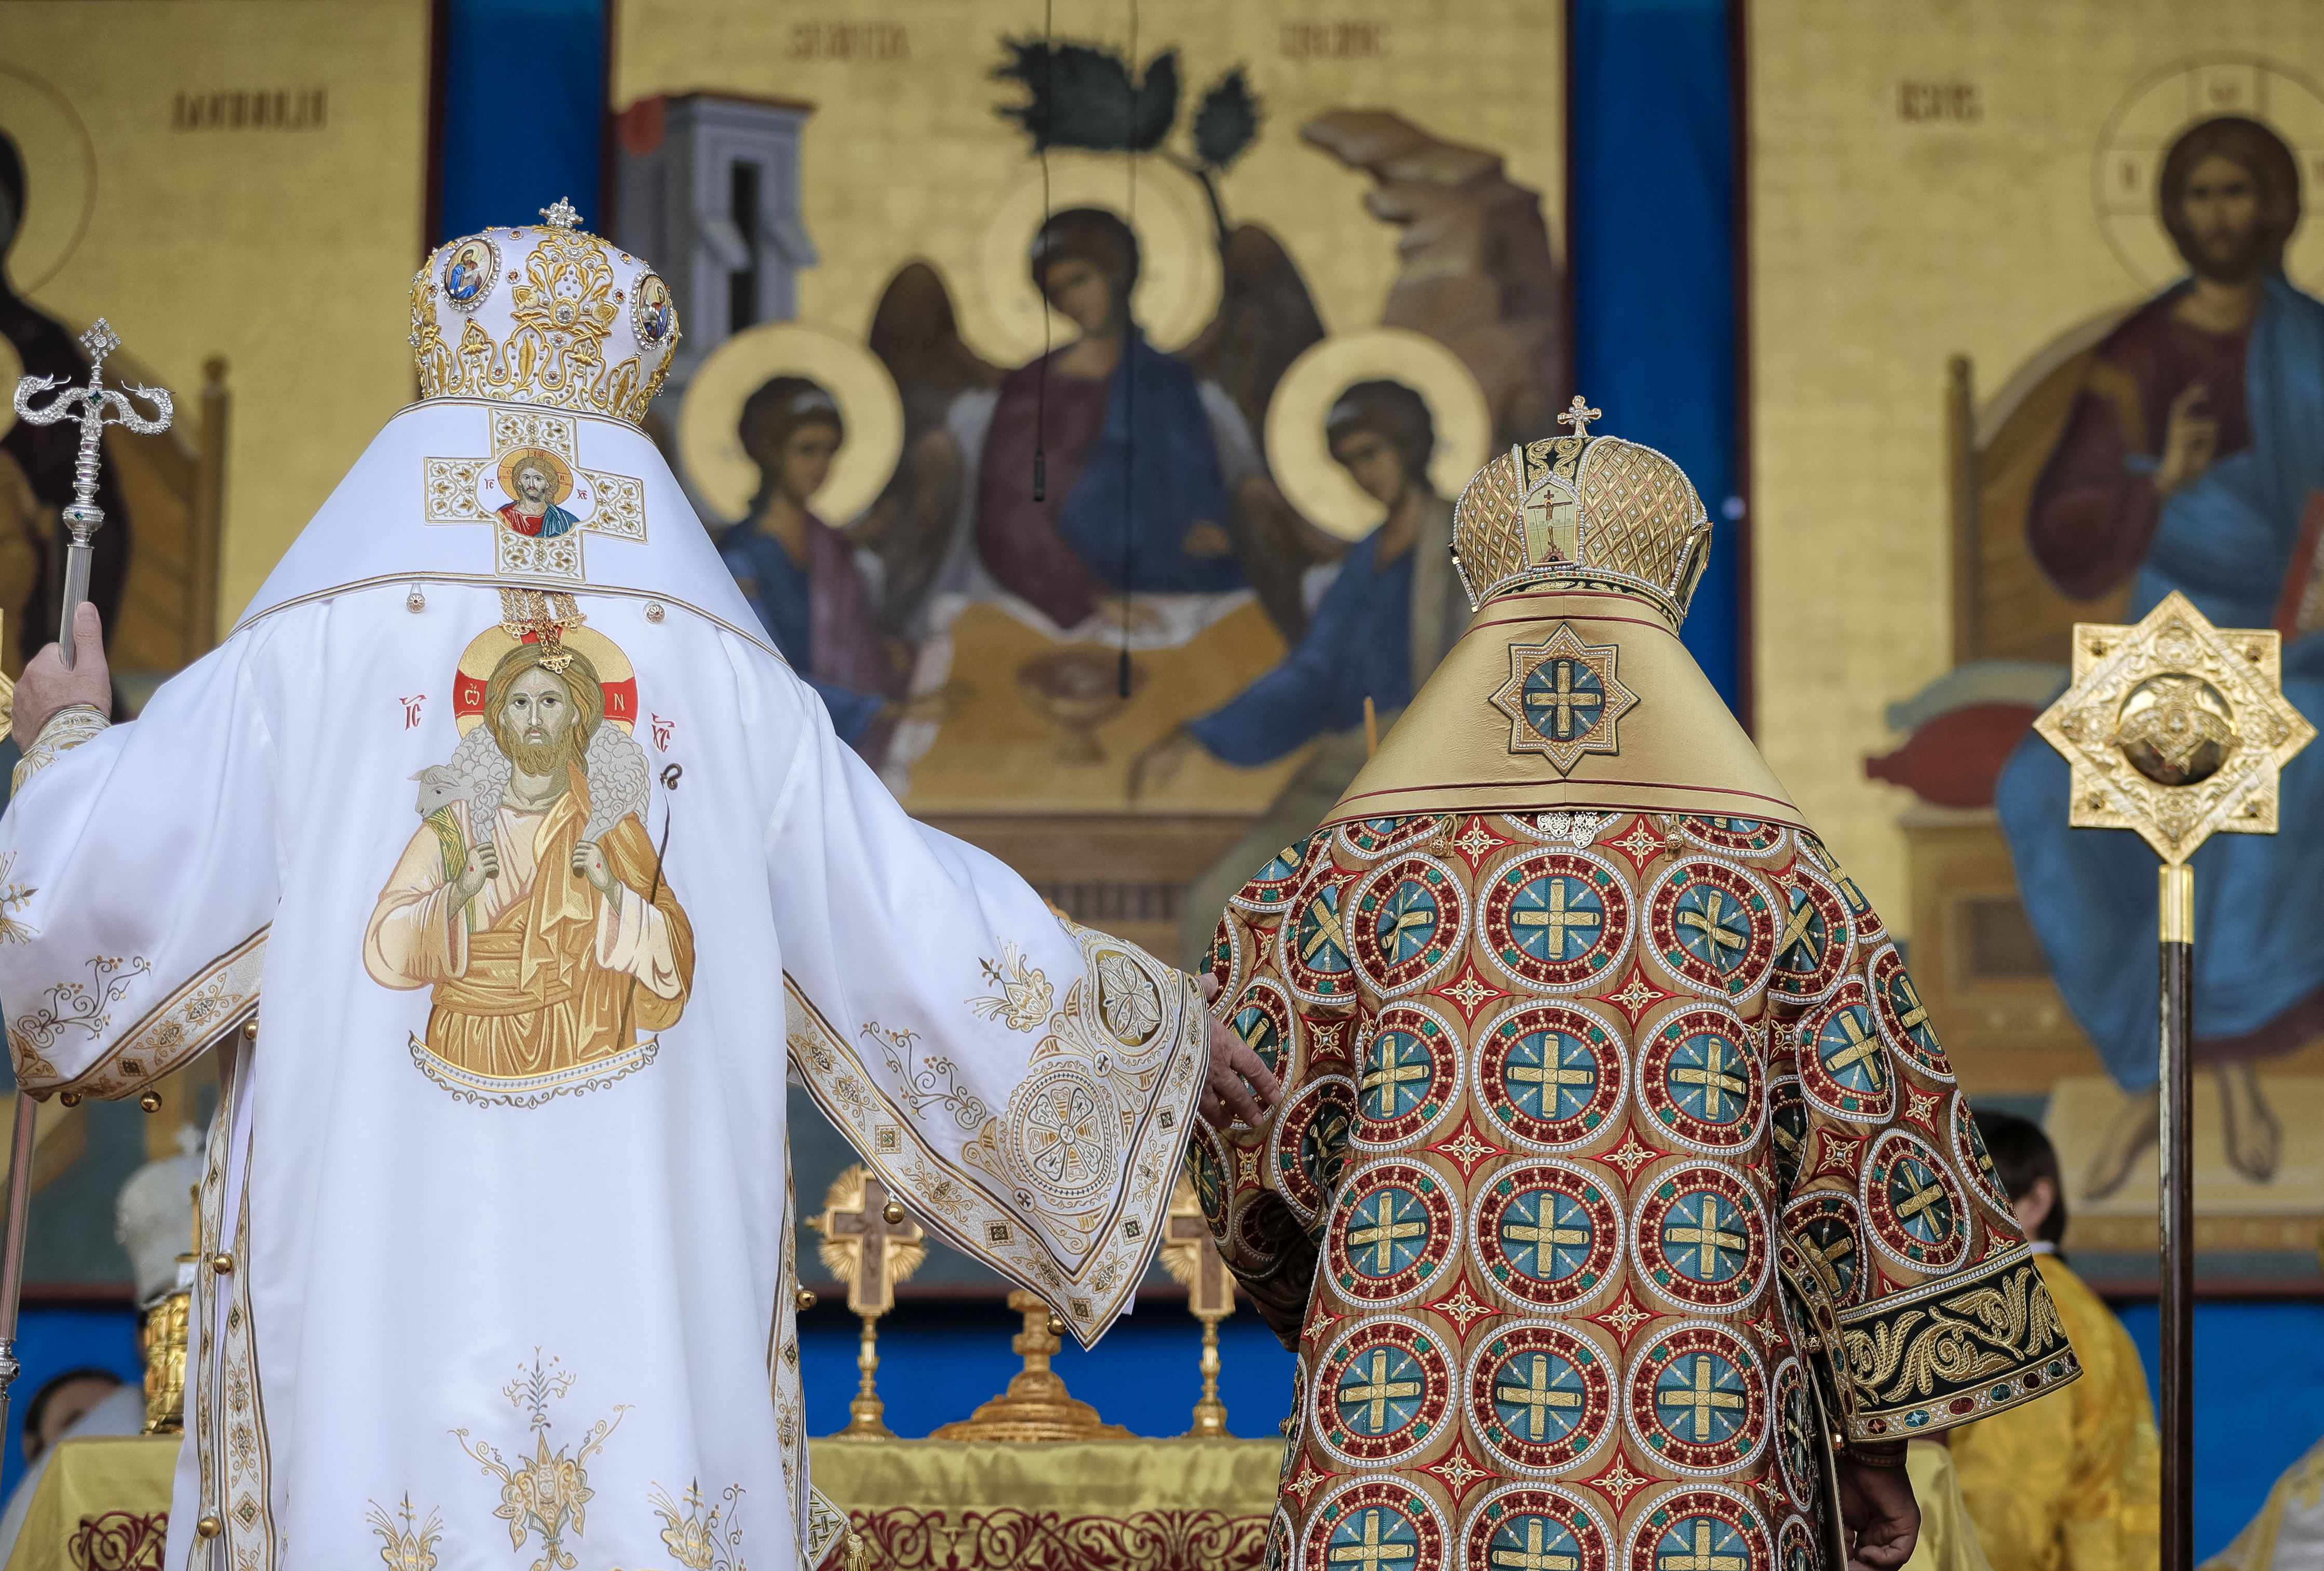 The head of the Russian Orthodox Church Patriarch Kirill Patriarch, right, walks with Patriarch Daniel, the head of the Romanian Orthodox Church during a religious service in Bucharest, Romania, Friday, Oct. 27, 2017. Russian Orthodox patriarch of Moscow Kirill is in Romania in the first visit by the head of the powerful Russian church since communism ended.(AP Photo/Vadim Ghirda)